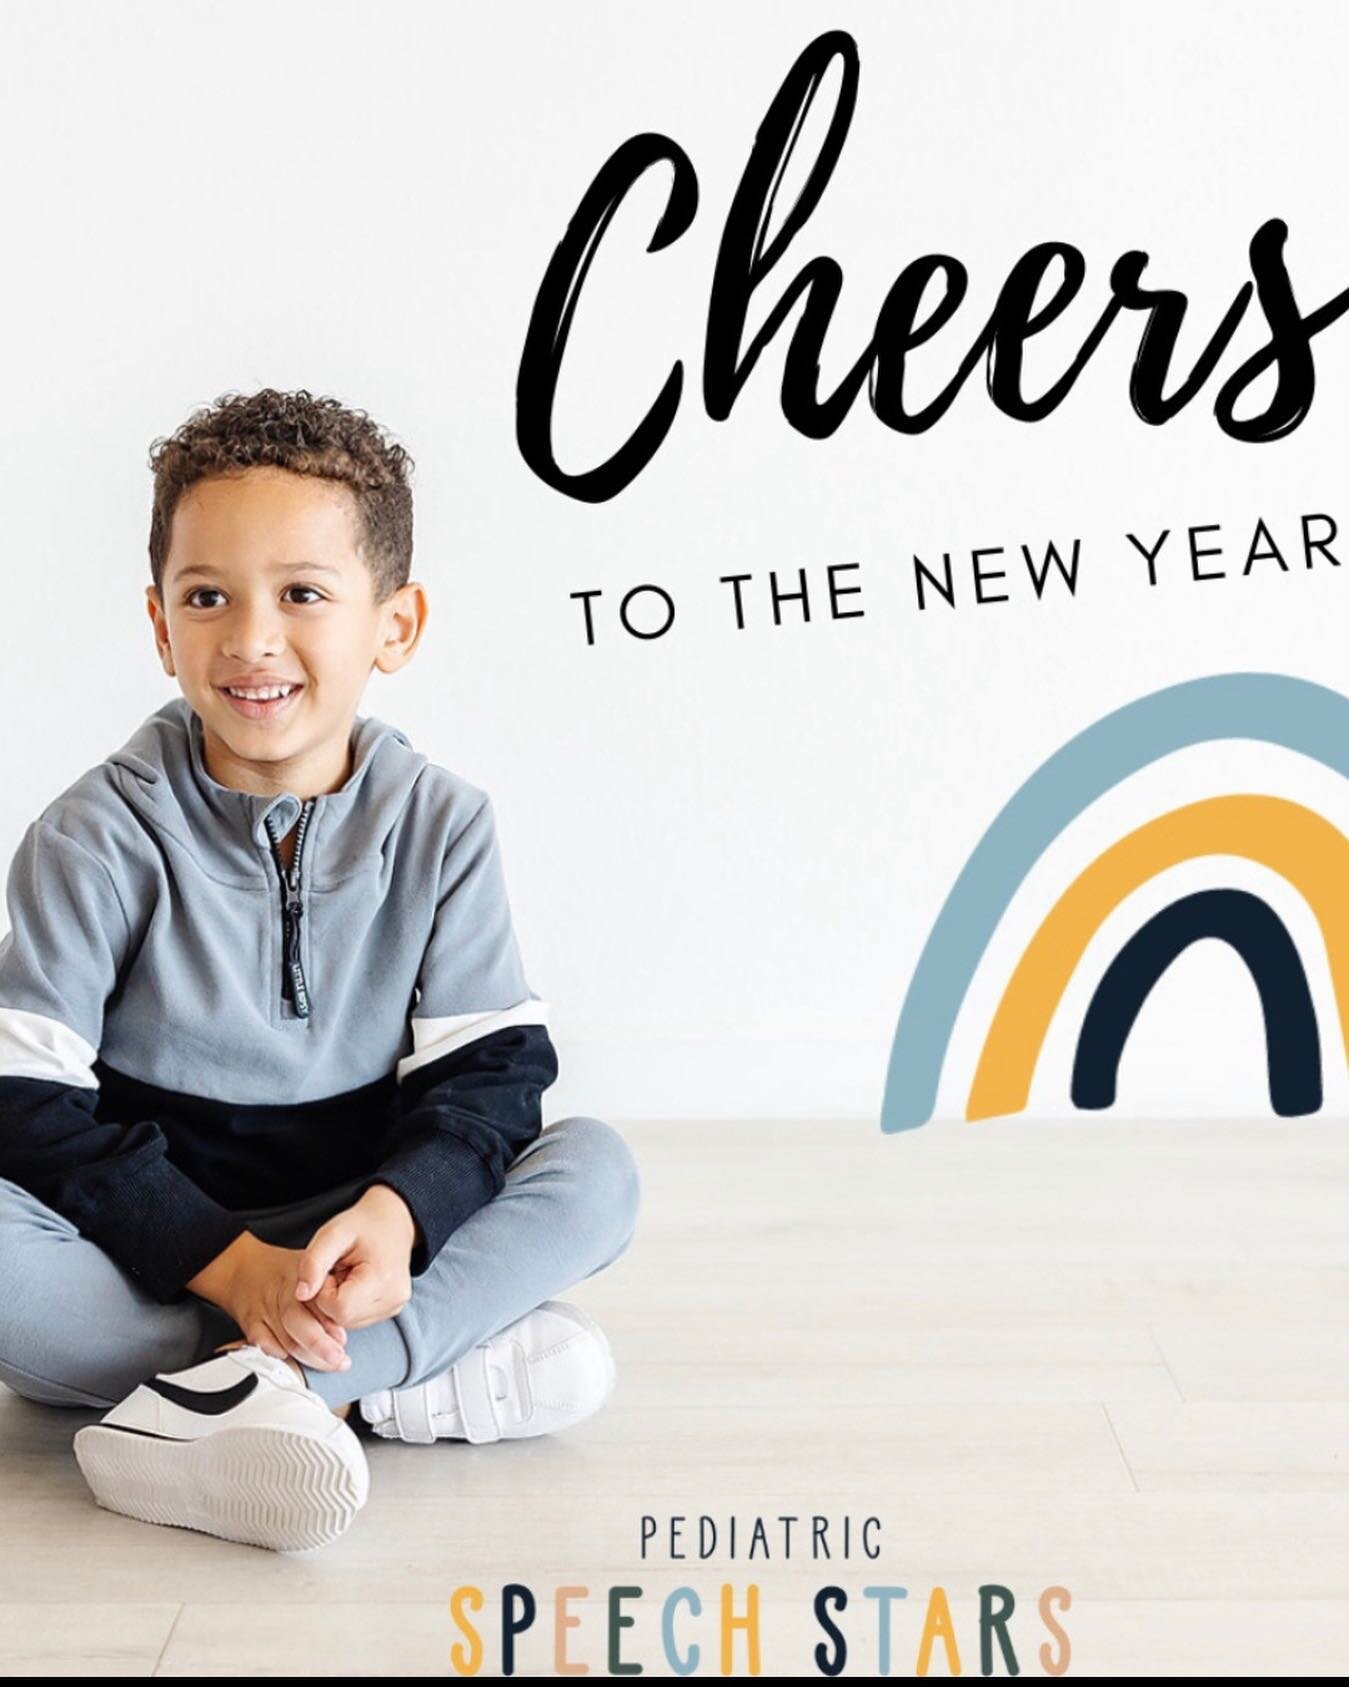 Happy New Year to all of our current &amp; former families! ✨

Some things we have to celebrate in 2023&hellip;
✨ 970 Visits Completed 
✨ 46 ⭐️⭐️⭐️⭐️⭐️ 5 star Google Reviews
✨ A team of 6 Speech Therapists providing individualized Speech Therapy conv